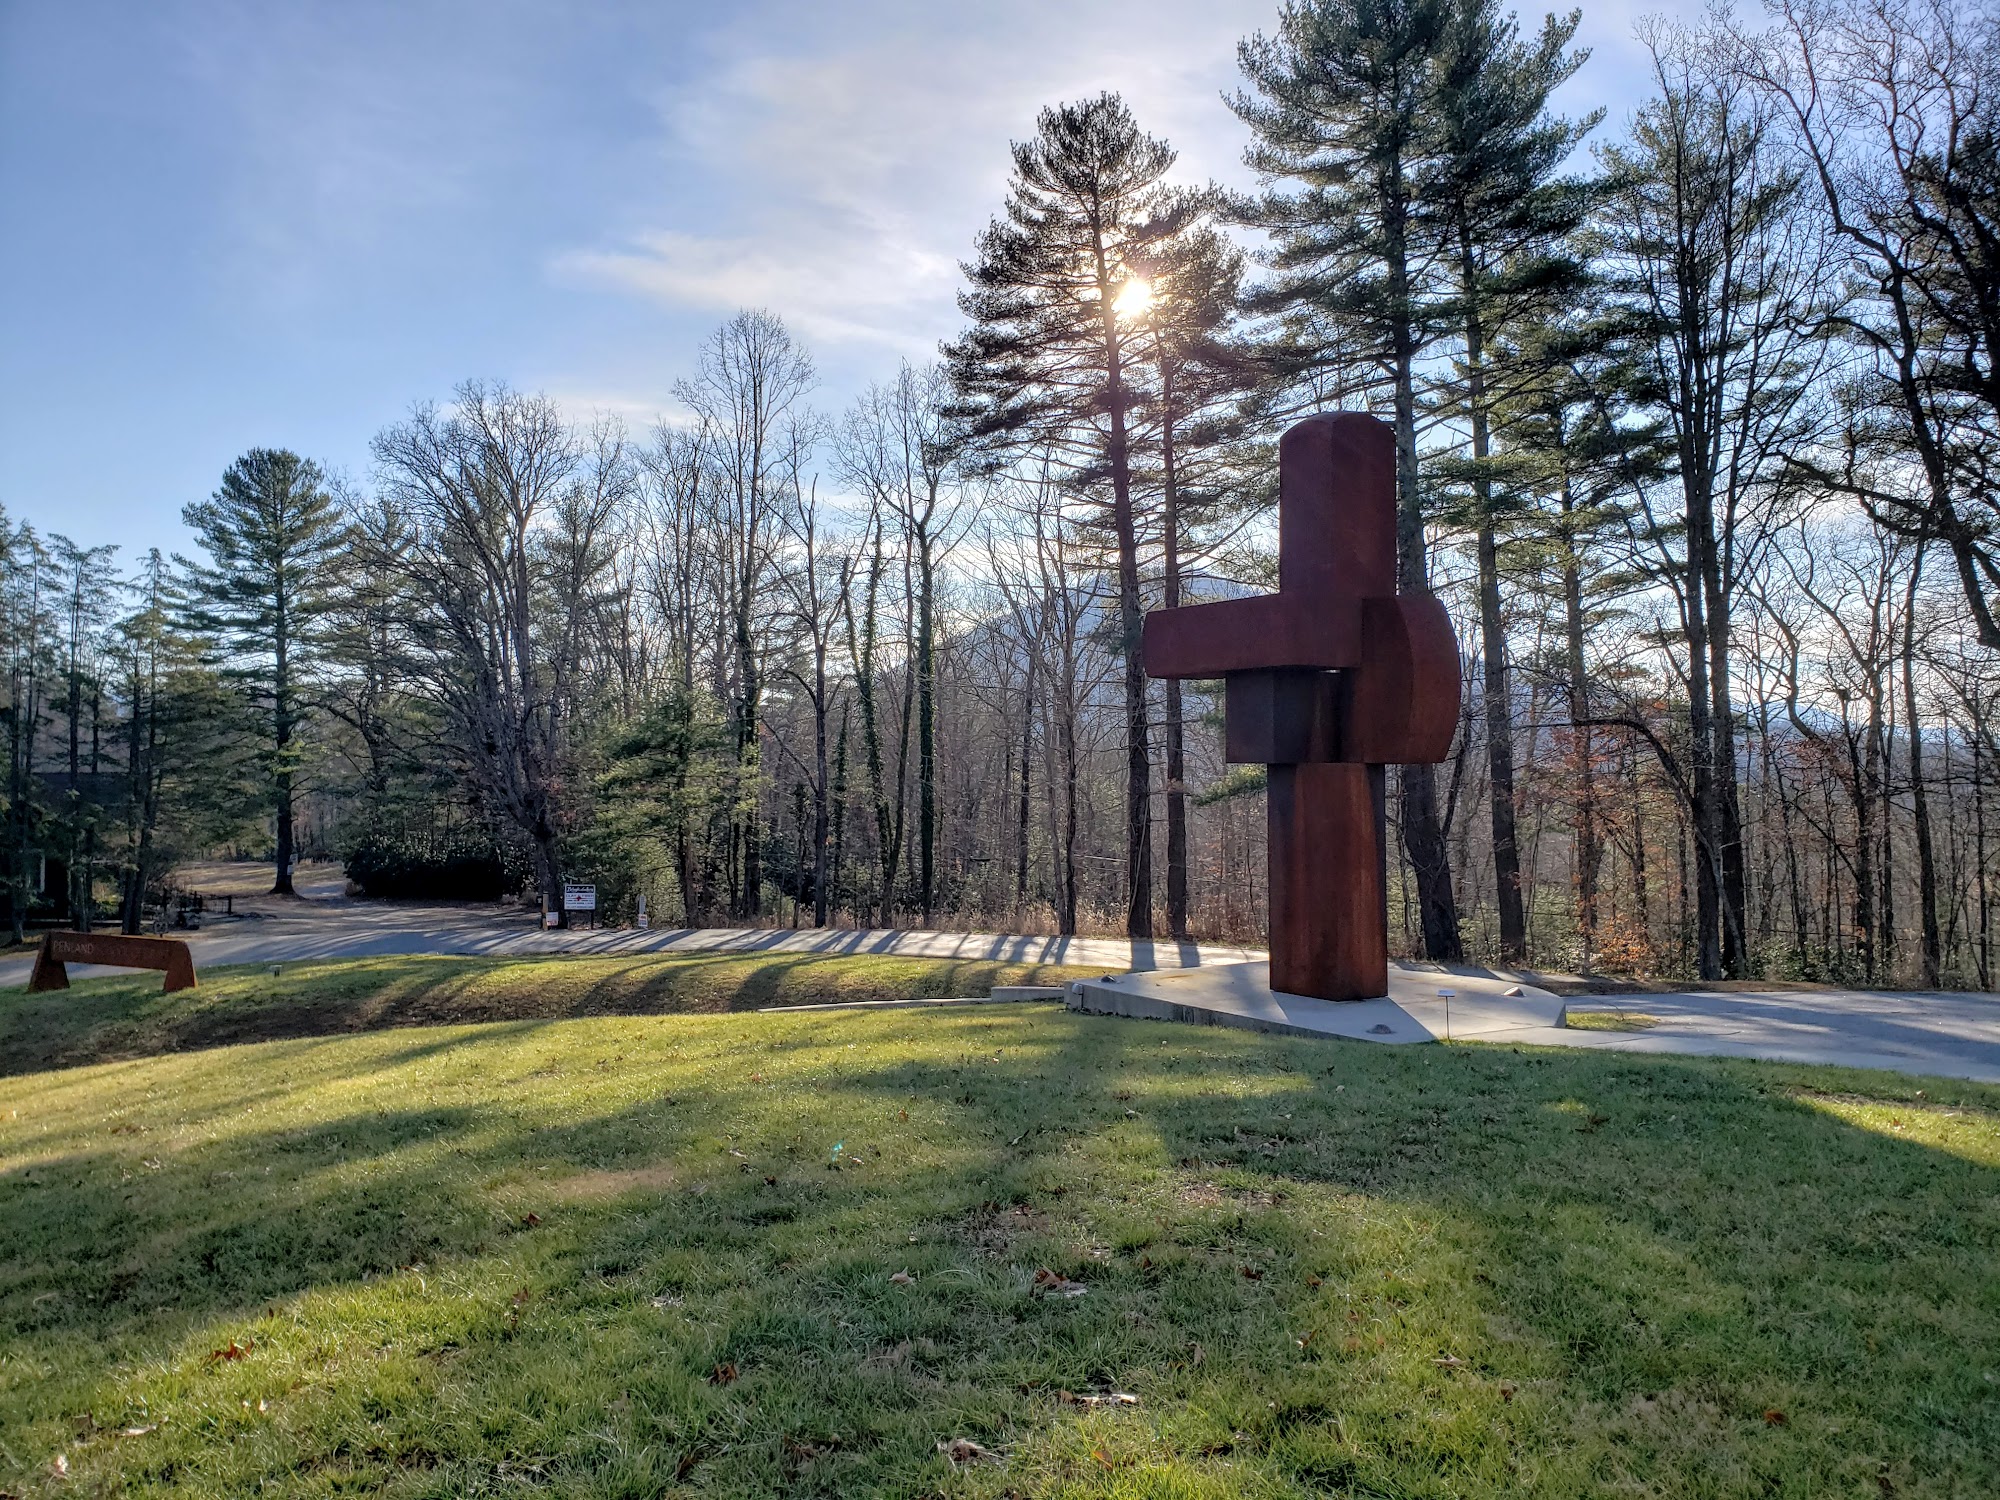 Penland Gallery and Visitors Center